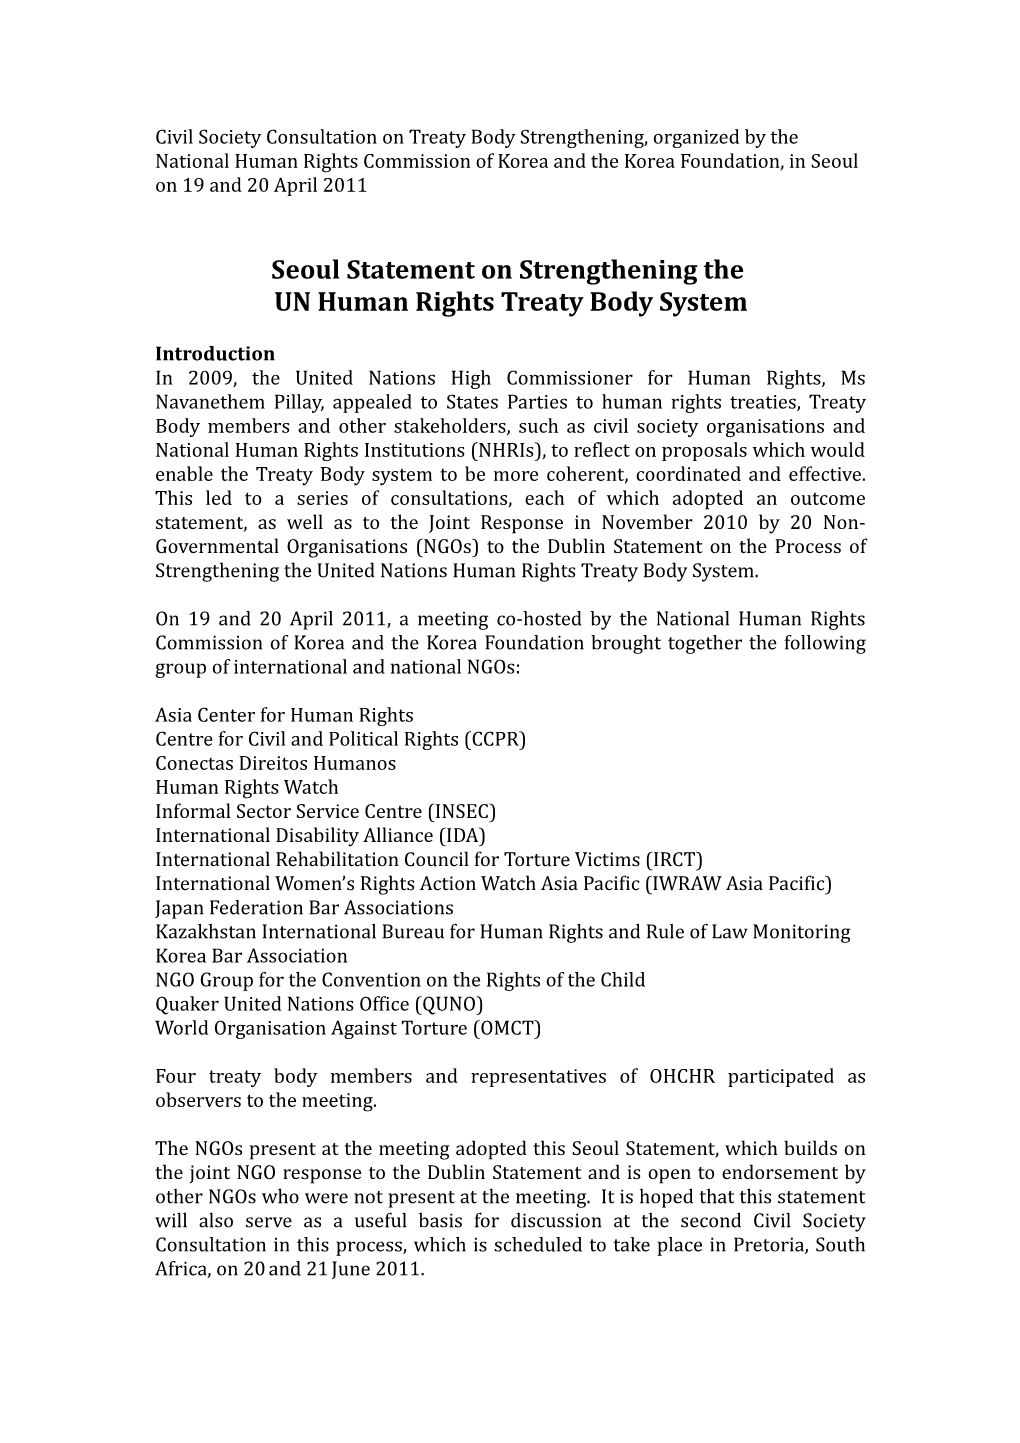 Seoul Statement on Strengthening The